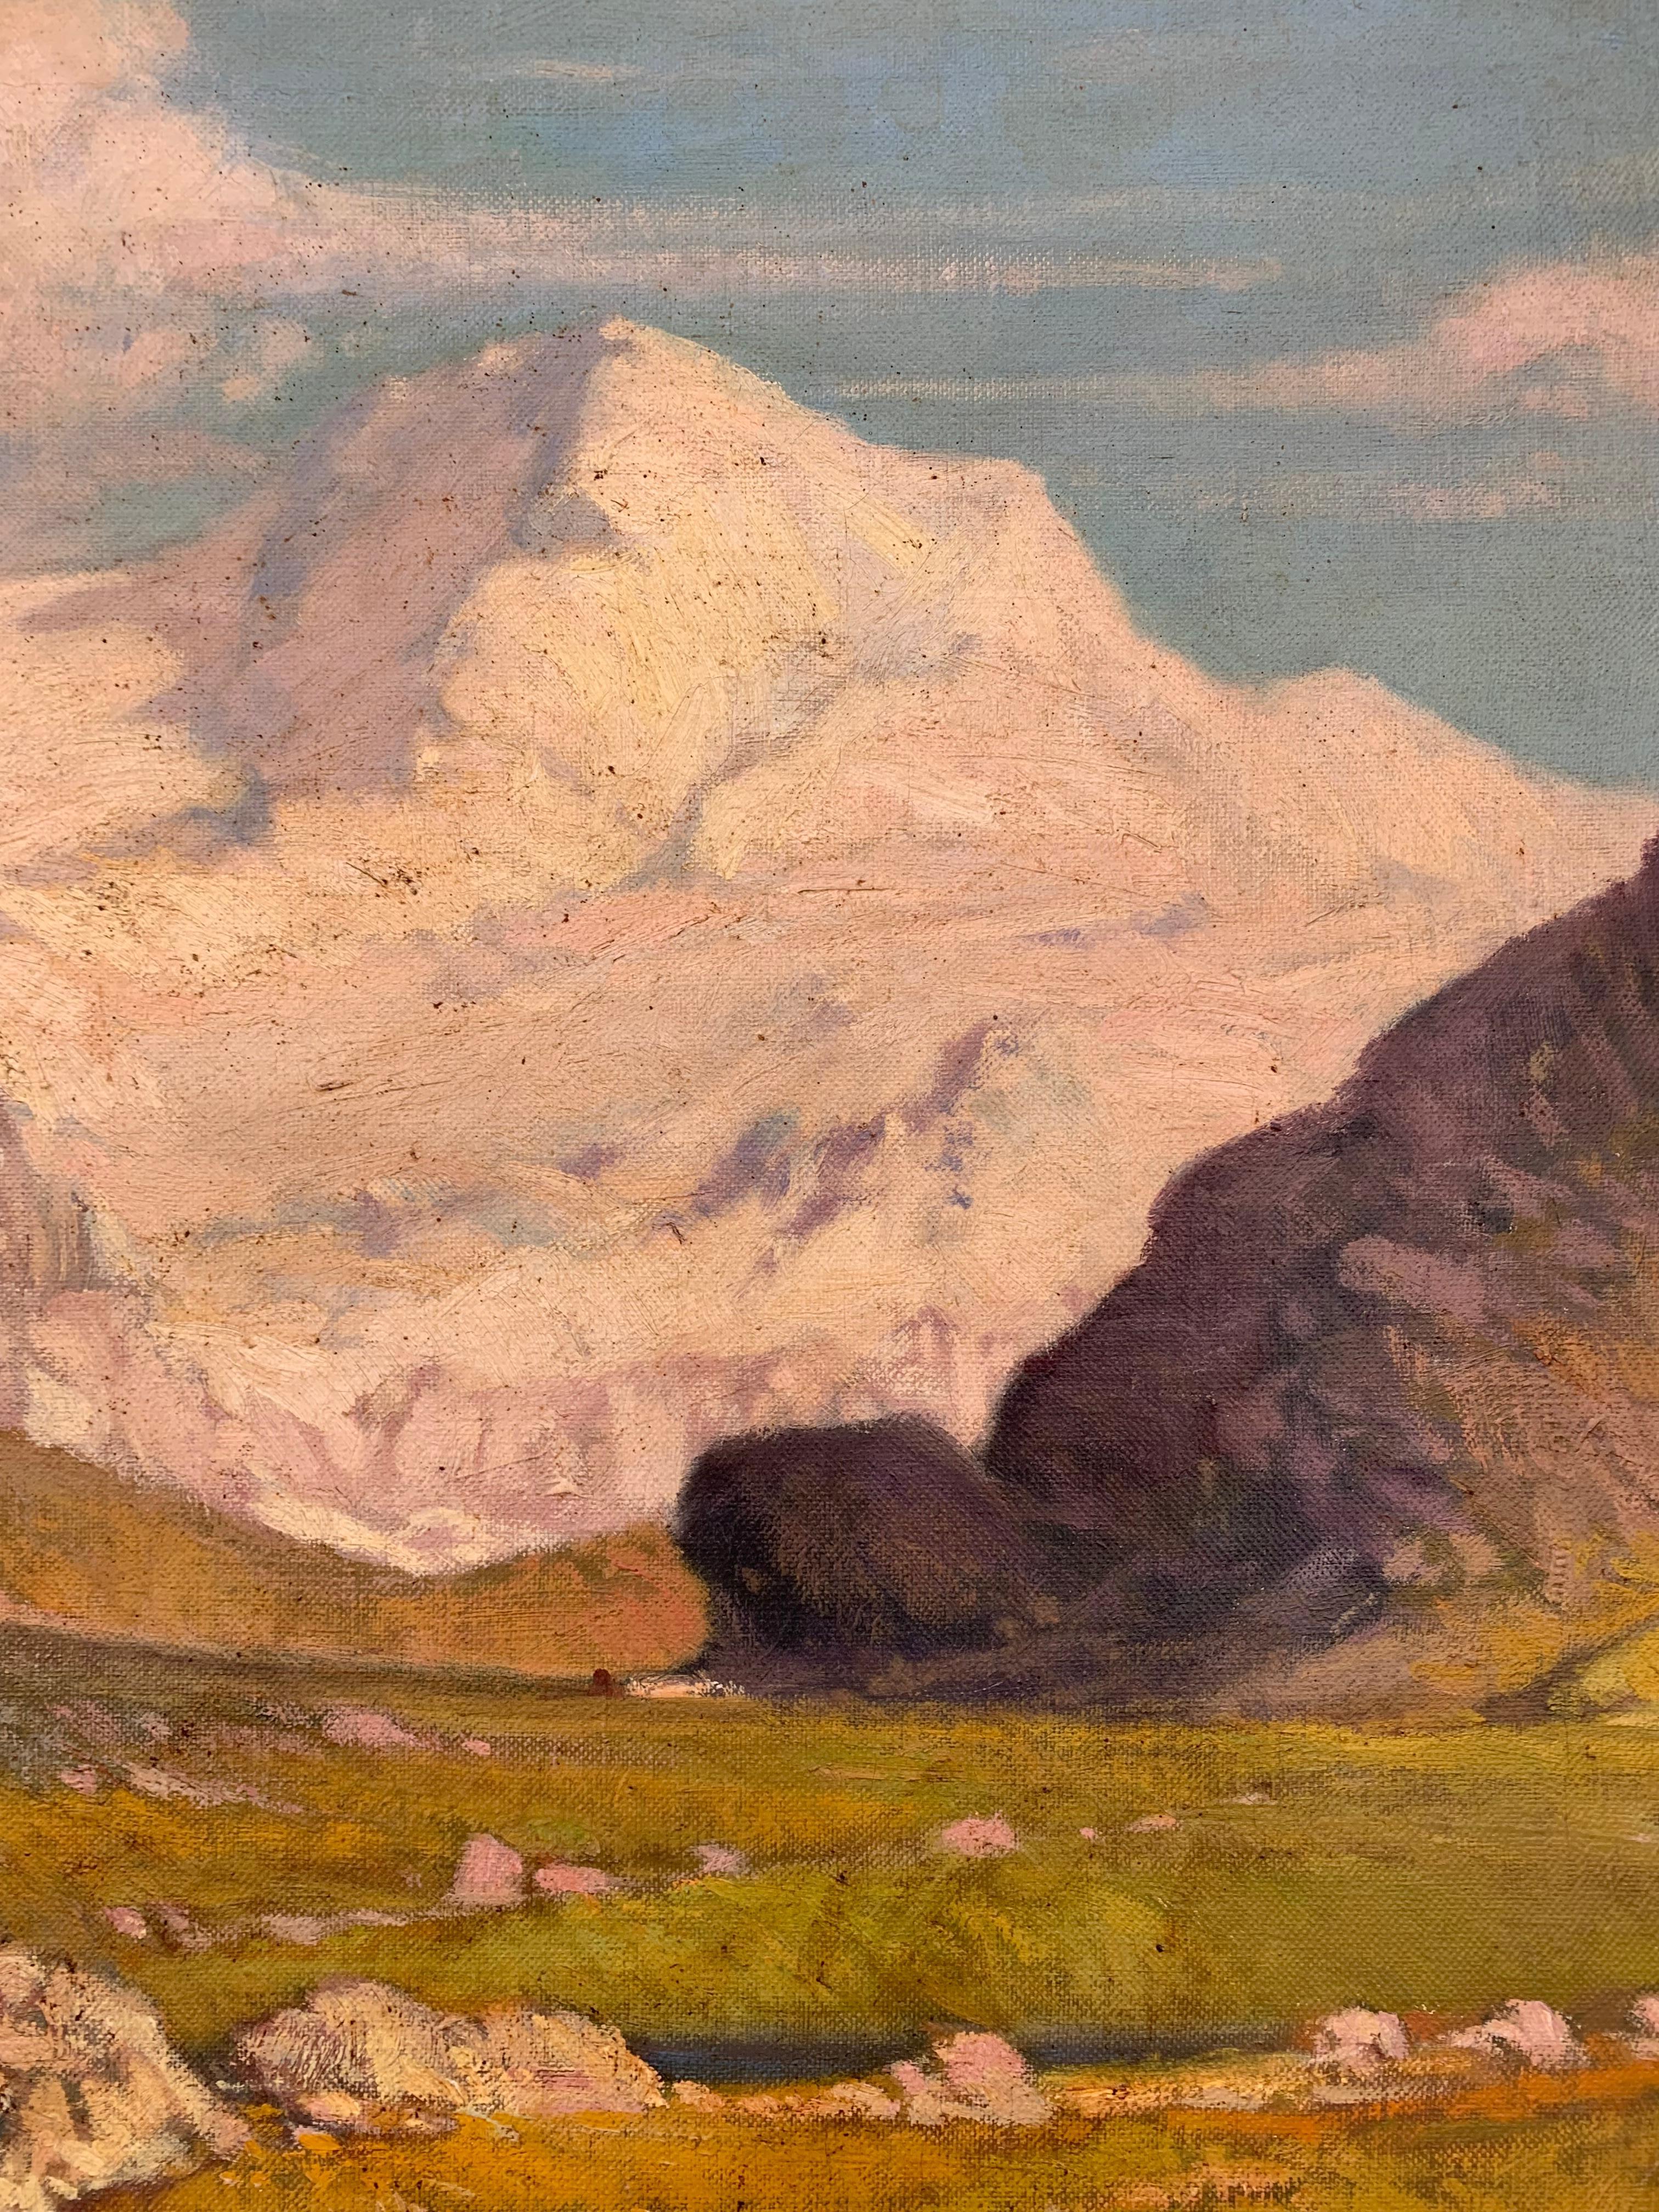 Ligurian Alps landscape with snow-capped peaks tinted by pink light. 

It's an oil on canvas depicting a mountain scene with a small rural building. 

The painting is of a rare, almost square format: it measures 101cm x 99cm with frame and is signed